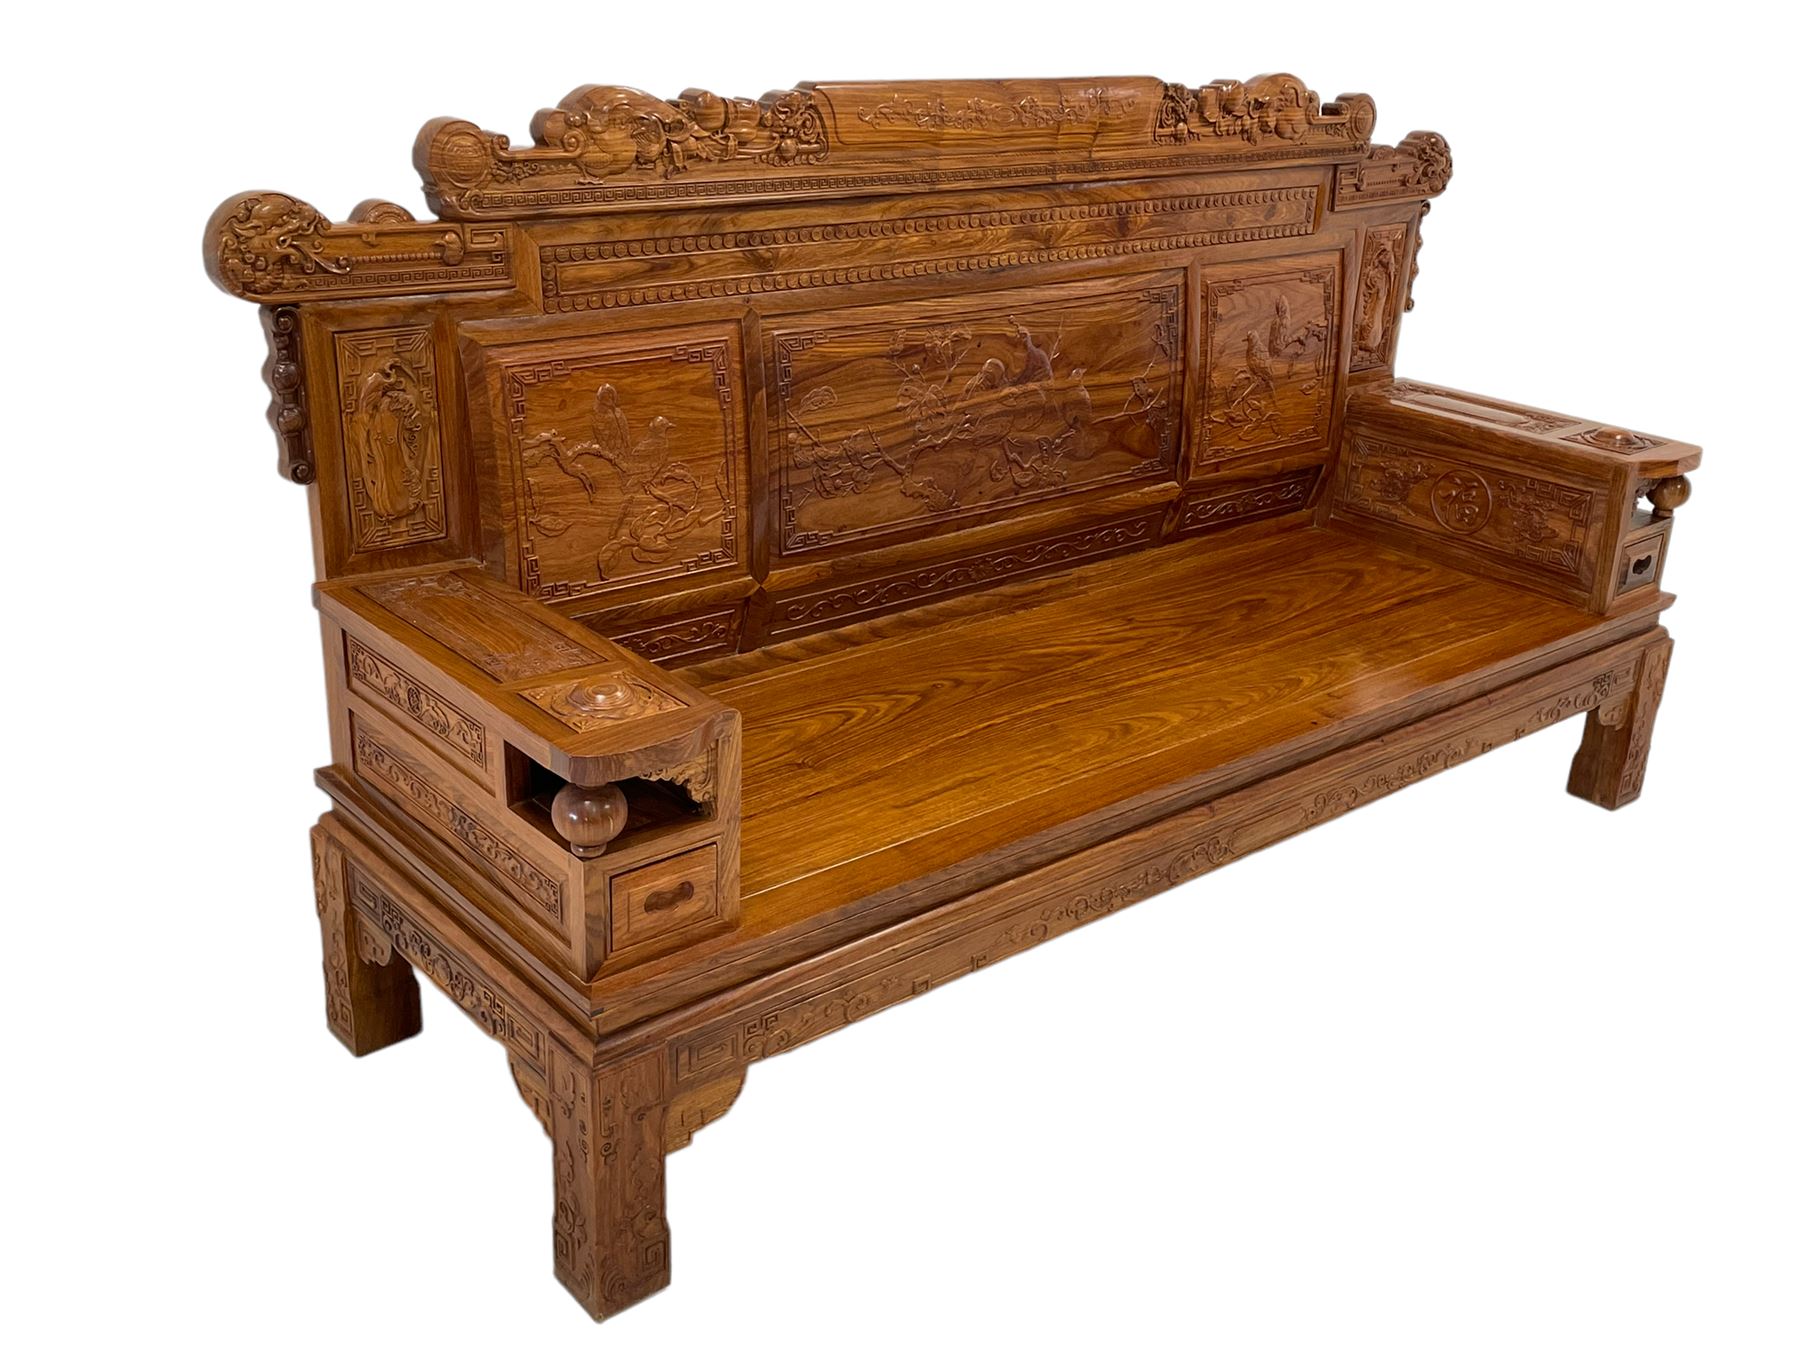 Chinese Imperial style hardwood throne room settee or sofa - Image 3 of 9